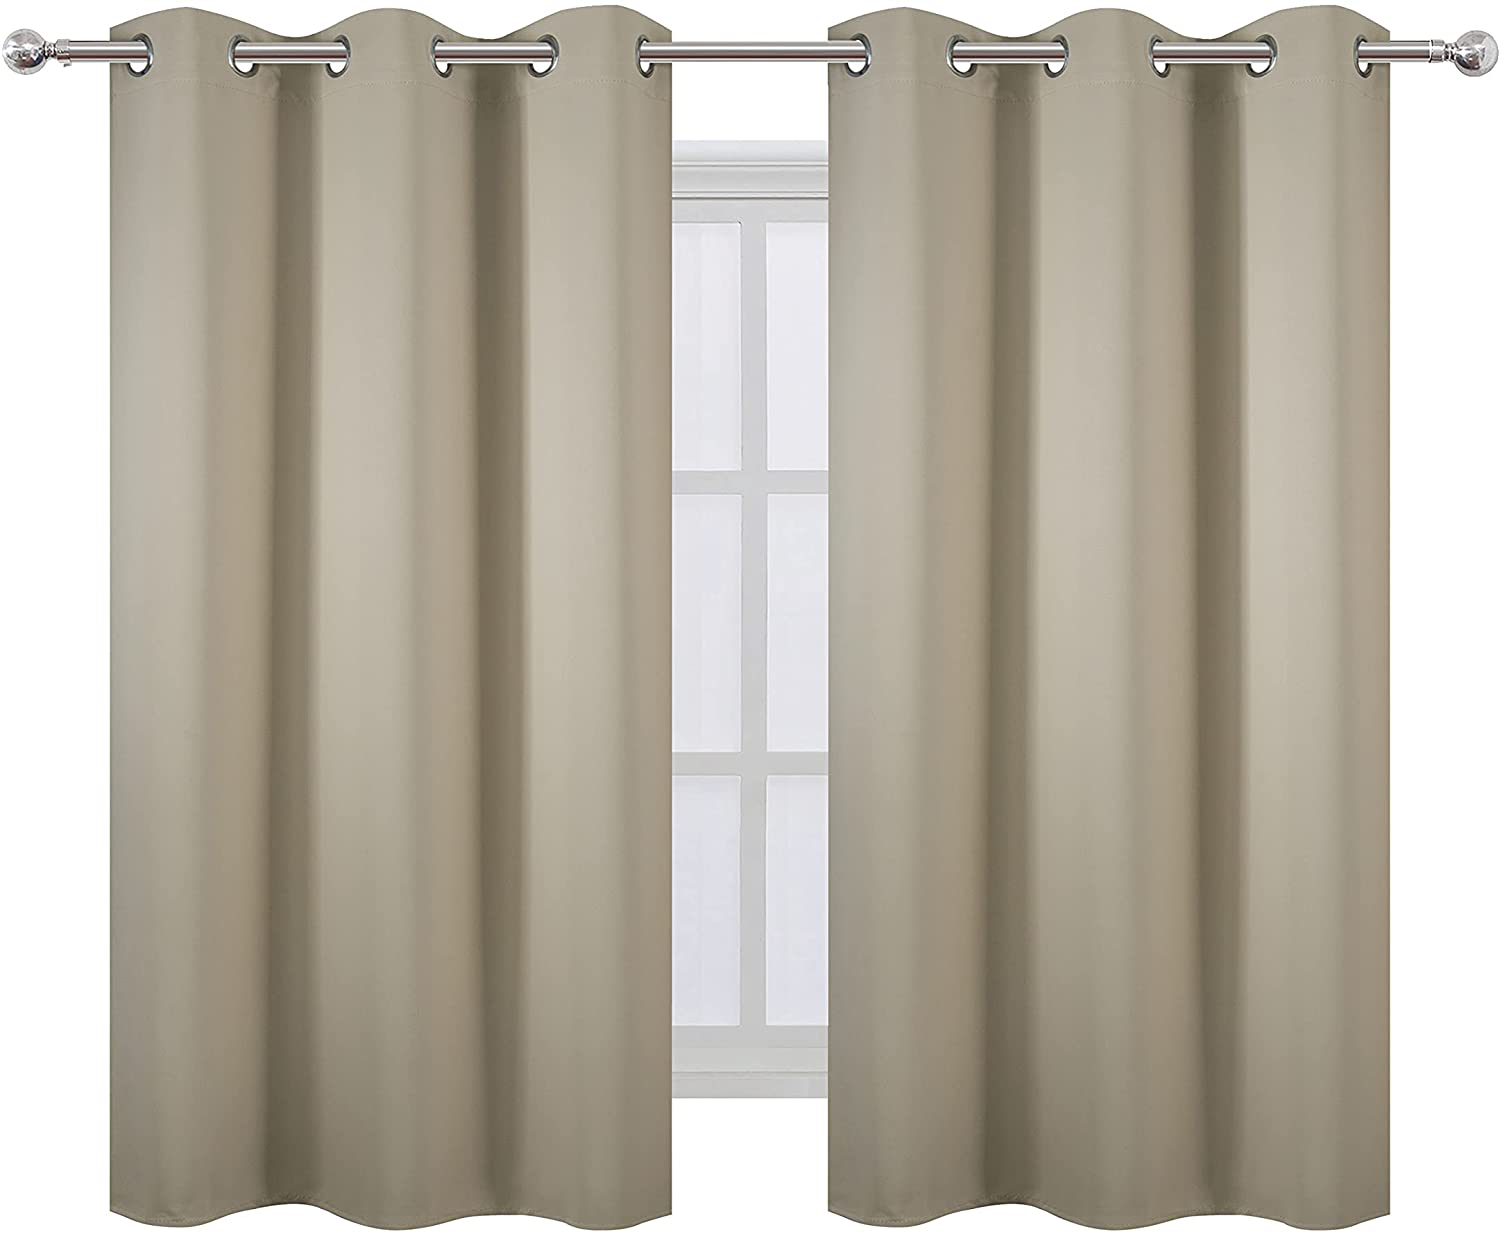 LEMOMO Chocolate Brown Thermal Blackout Curtains/52 x 95 Inch/Set of 2 Panels Room Darkening Curtains for Bedroom